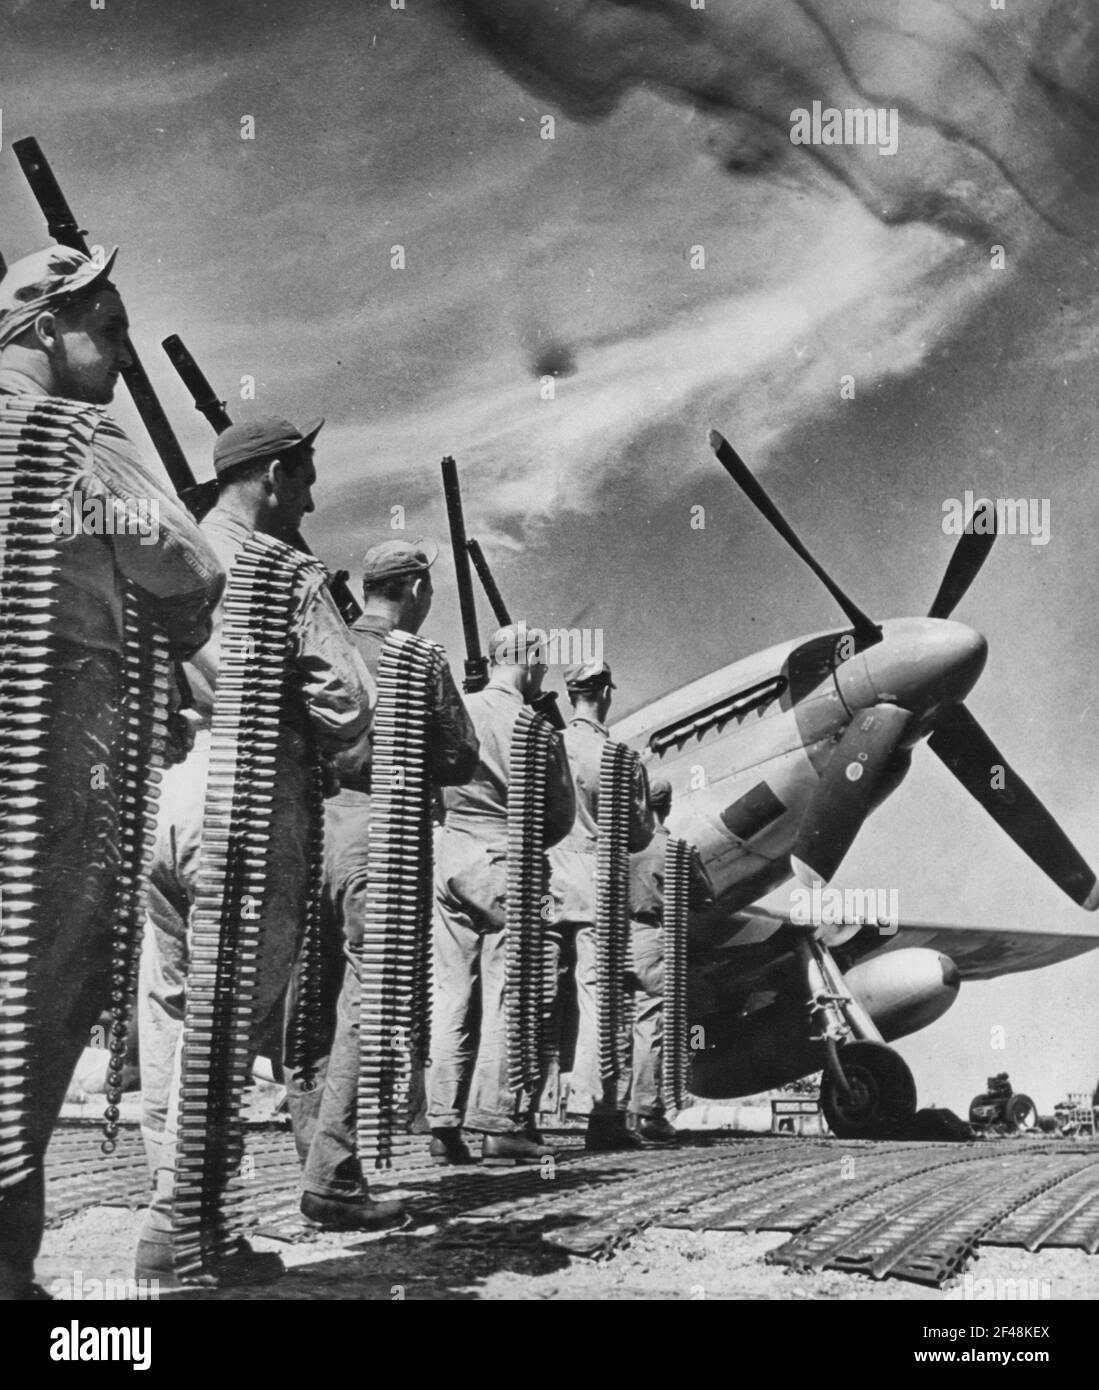 FIRE POWER OF THE P-51 MUSTANG FIGHTER. These are the six .50 calibre machine guns used in the new U.S. Army 8th Air force P-51 Mustang fighters. The cartridge belts being carried represent the amount used by only ONE gun on a flight Stock Photo